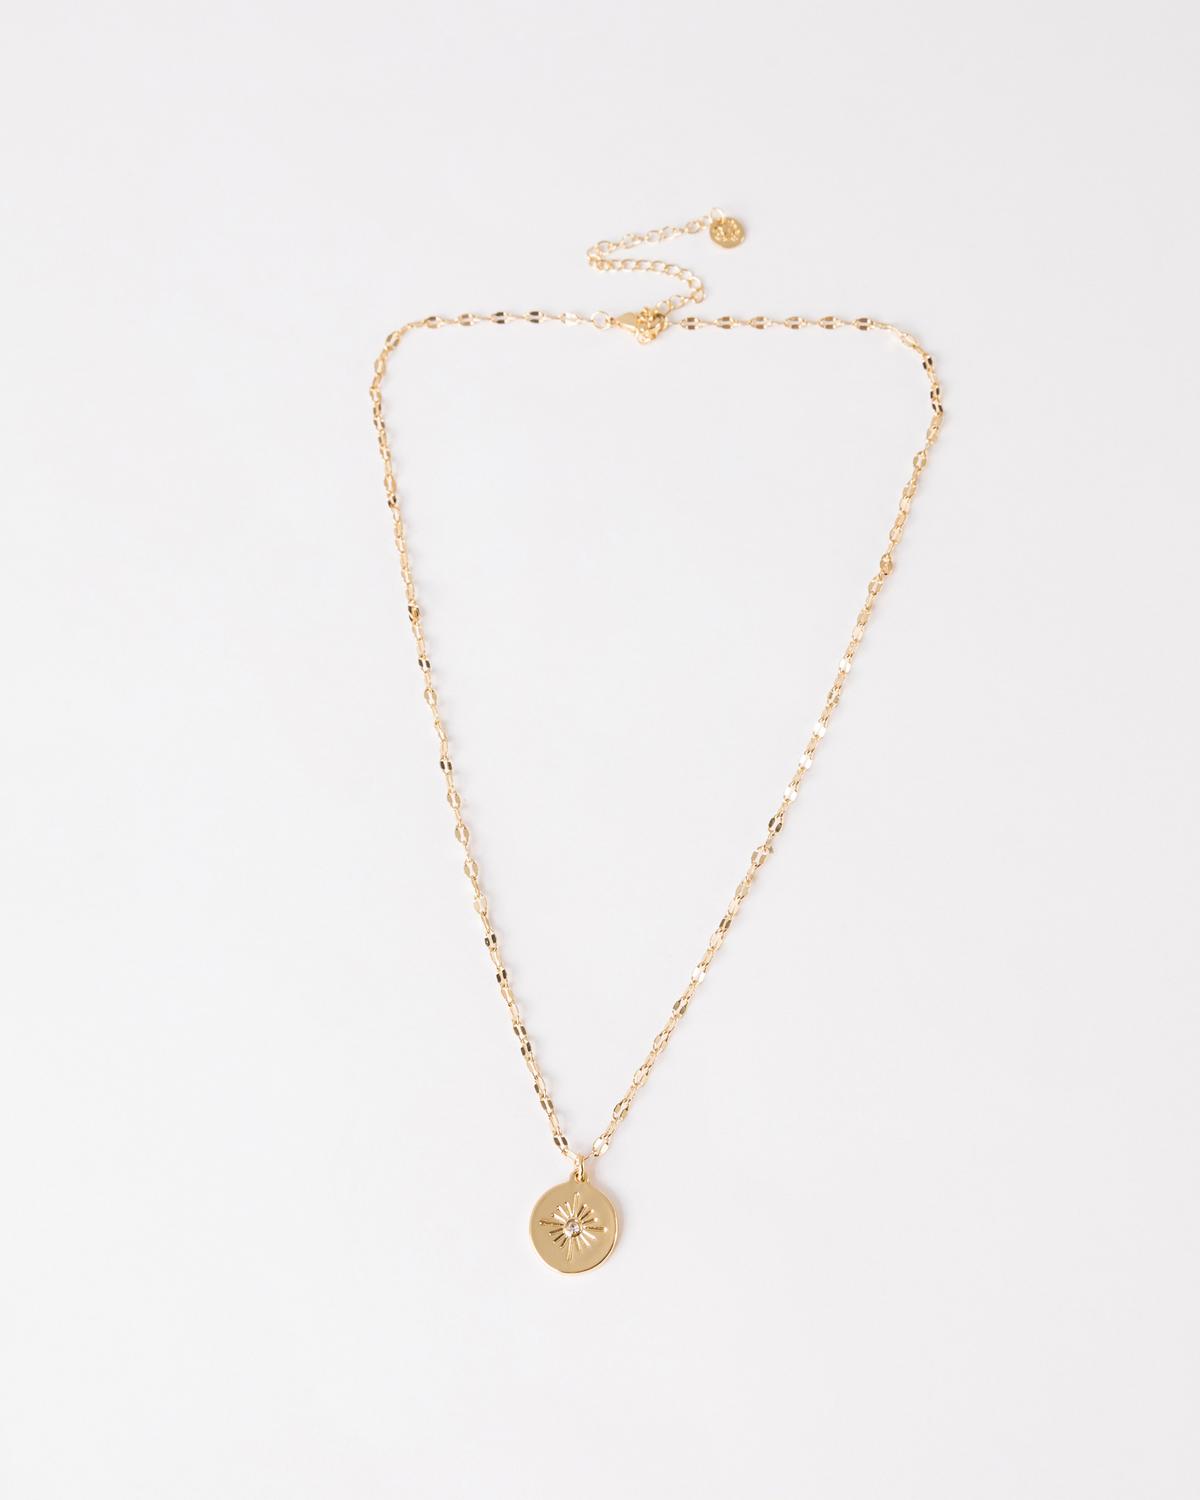 Women’s Flower Disk Charm Necklace  -  Gold